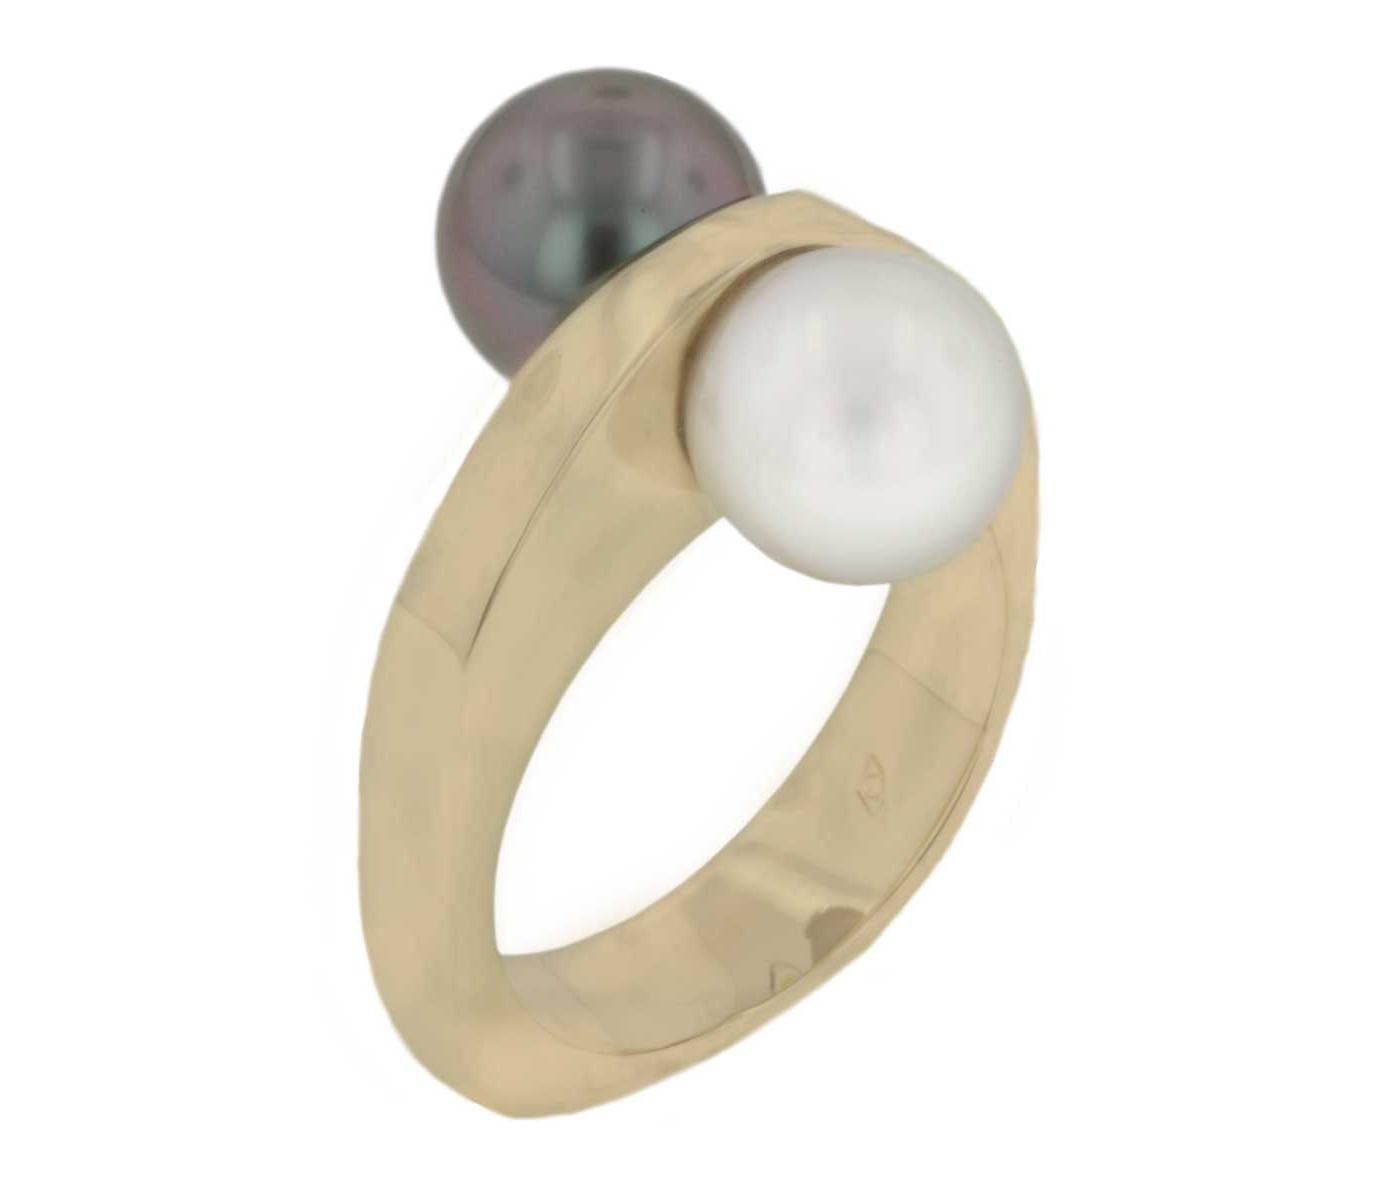 Ring by Lithos Jewelry